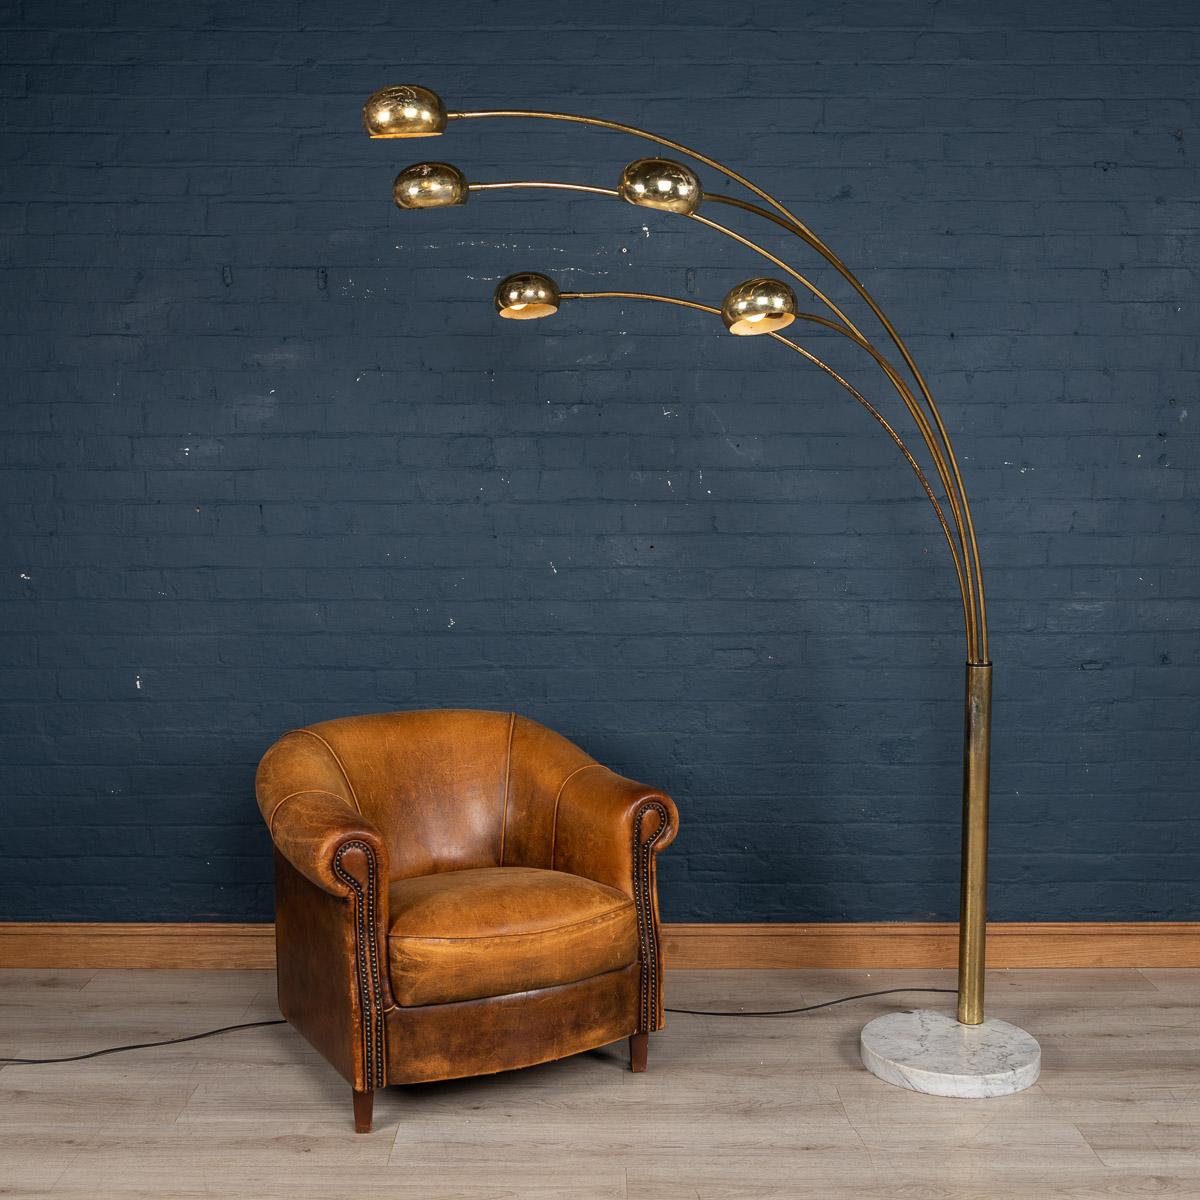 Chic Italian 1960s-1970s Harvy Guzzini arc floor lamp with five swivel arms and ball shades. Brass shades are adjustable, arms can be adjusted horizontally about 180 degrees. Supported by original thick marble base. Original wiring and in working